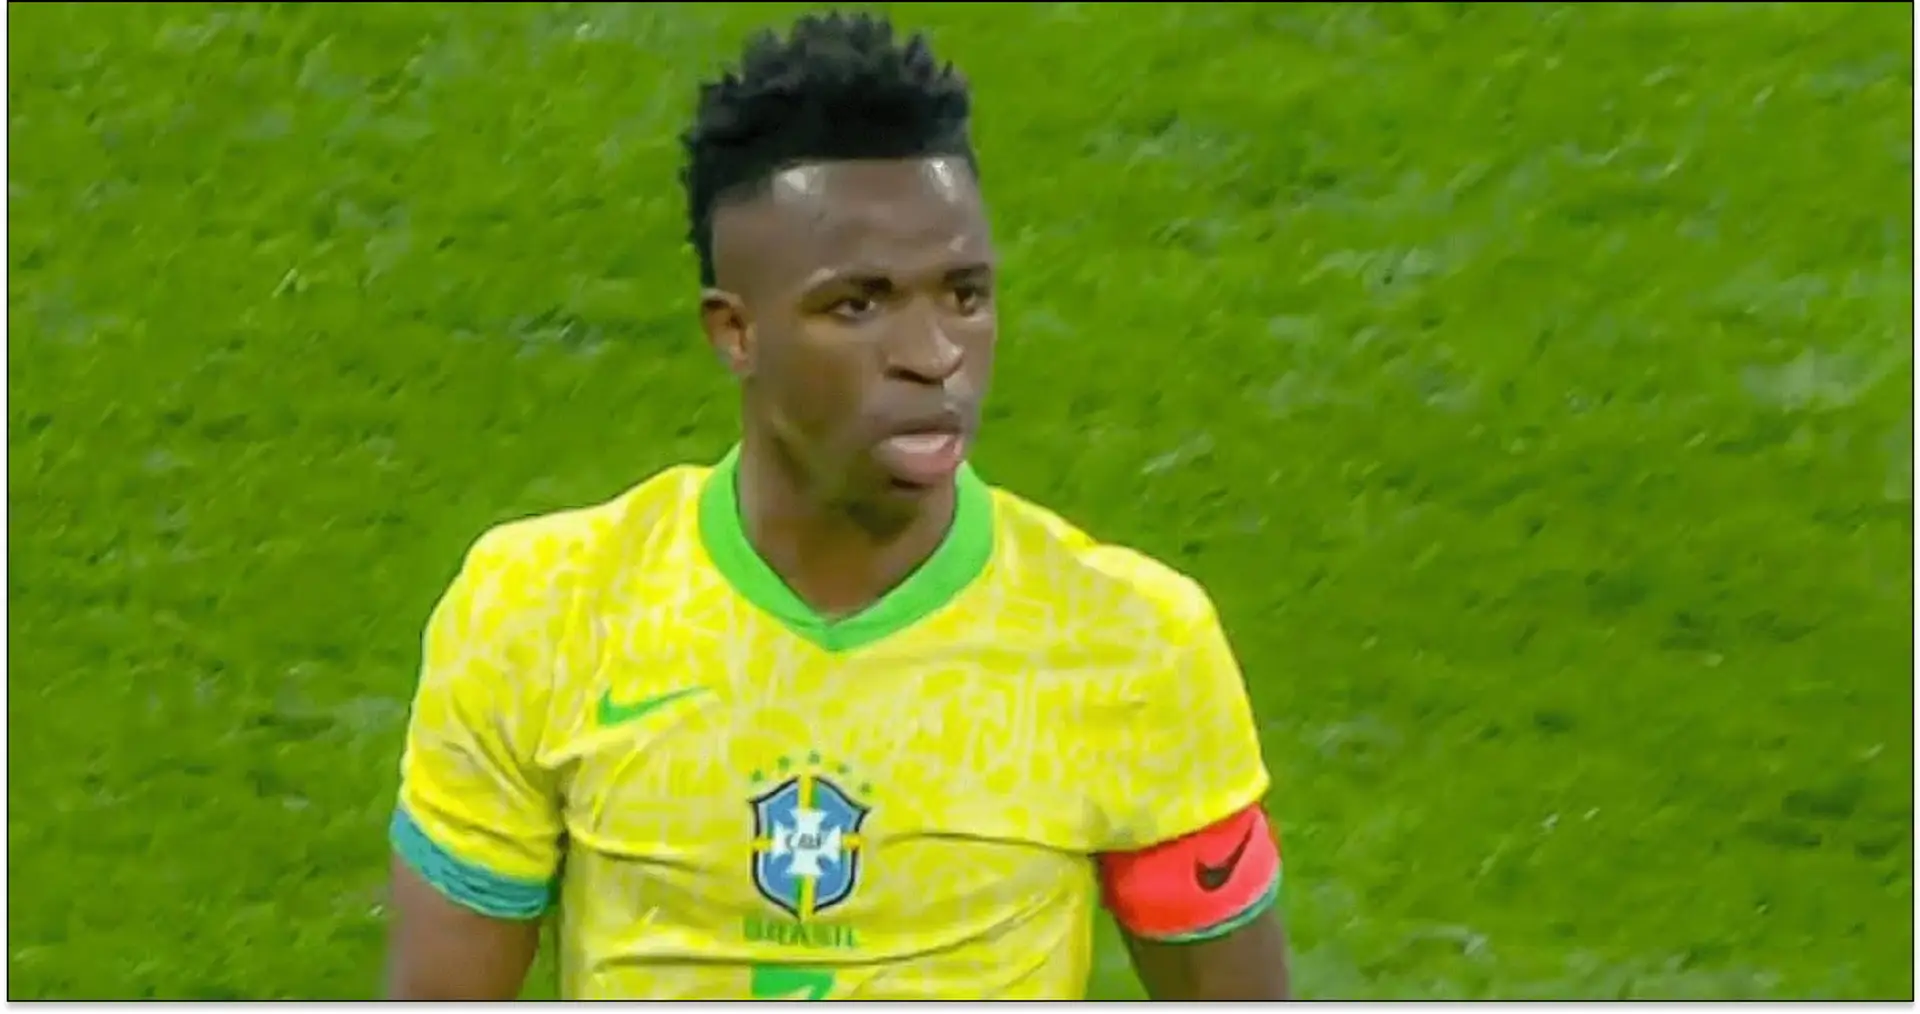 3 cold pictures as Vinicius Jr. captains Brazil in insane Spain game at Bernabeu